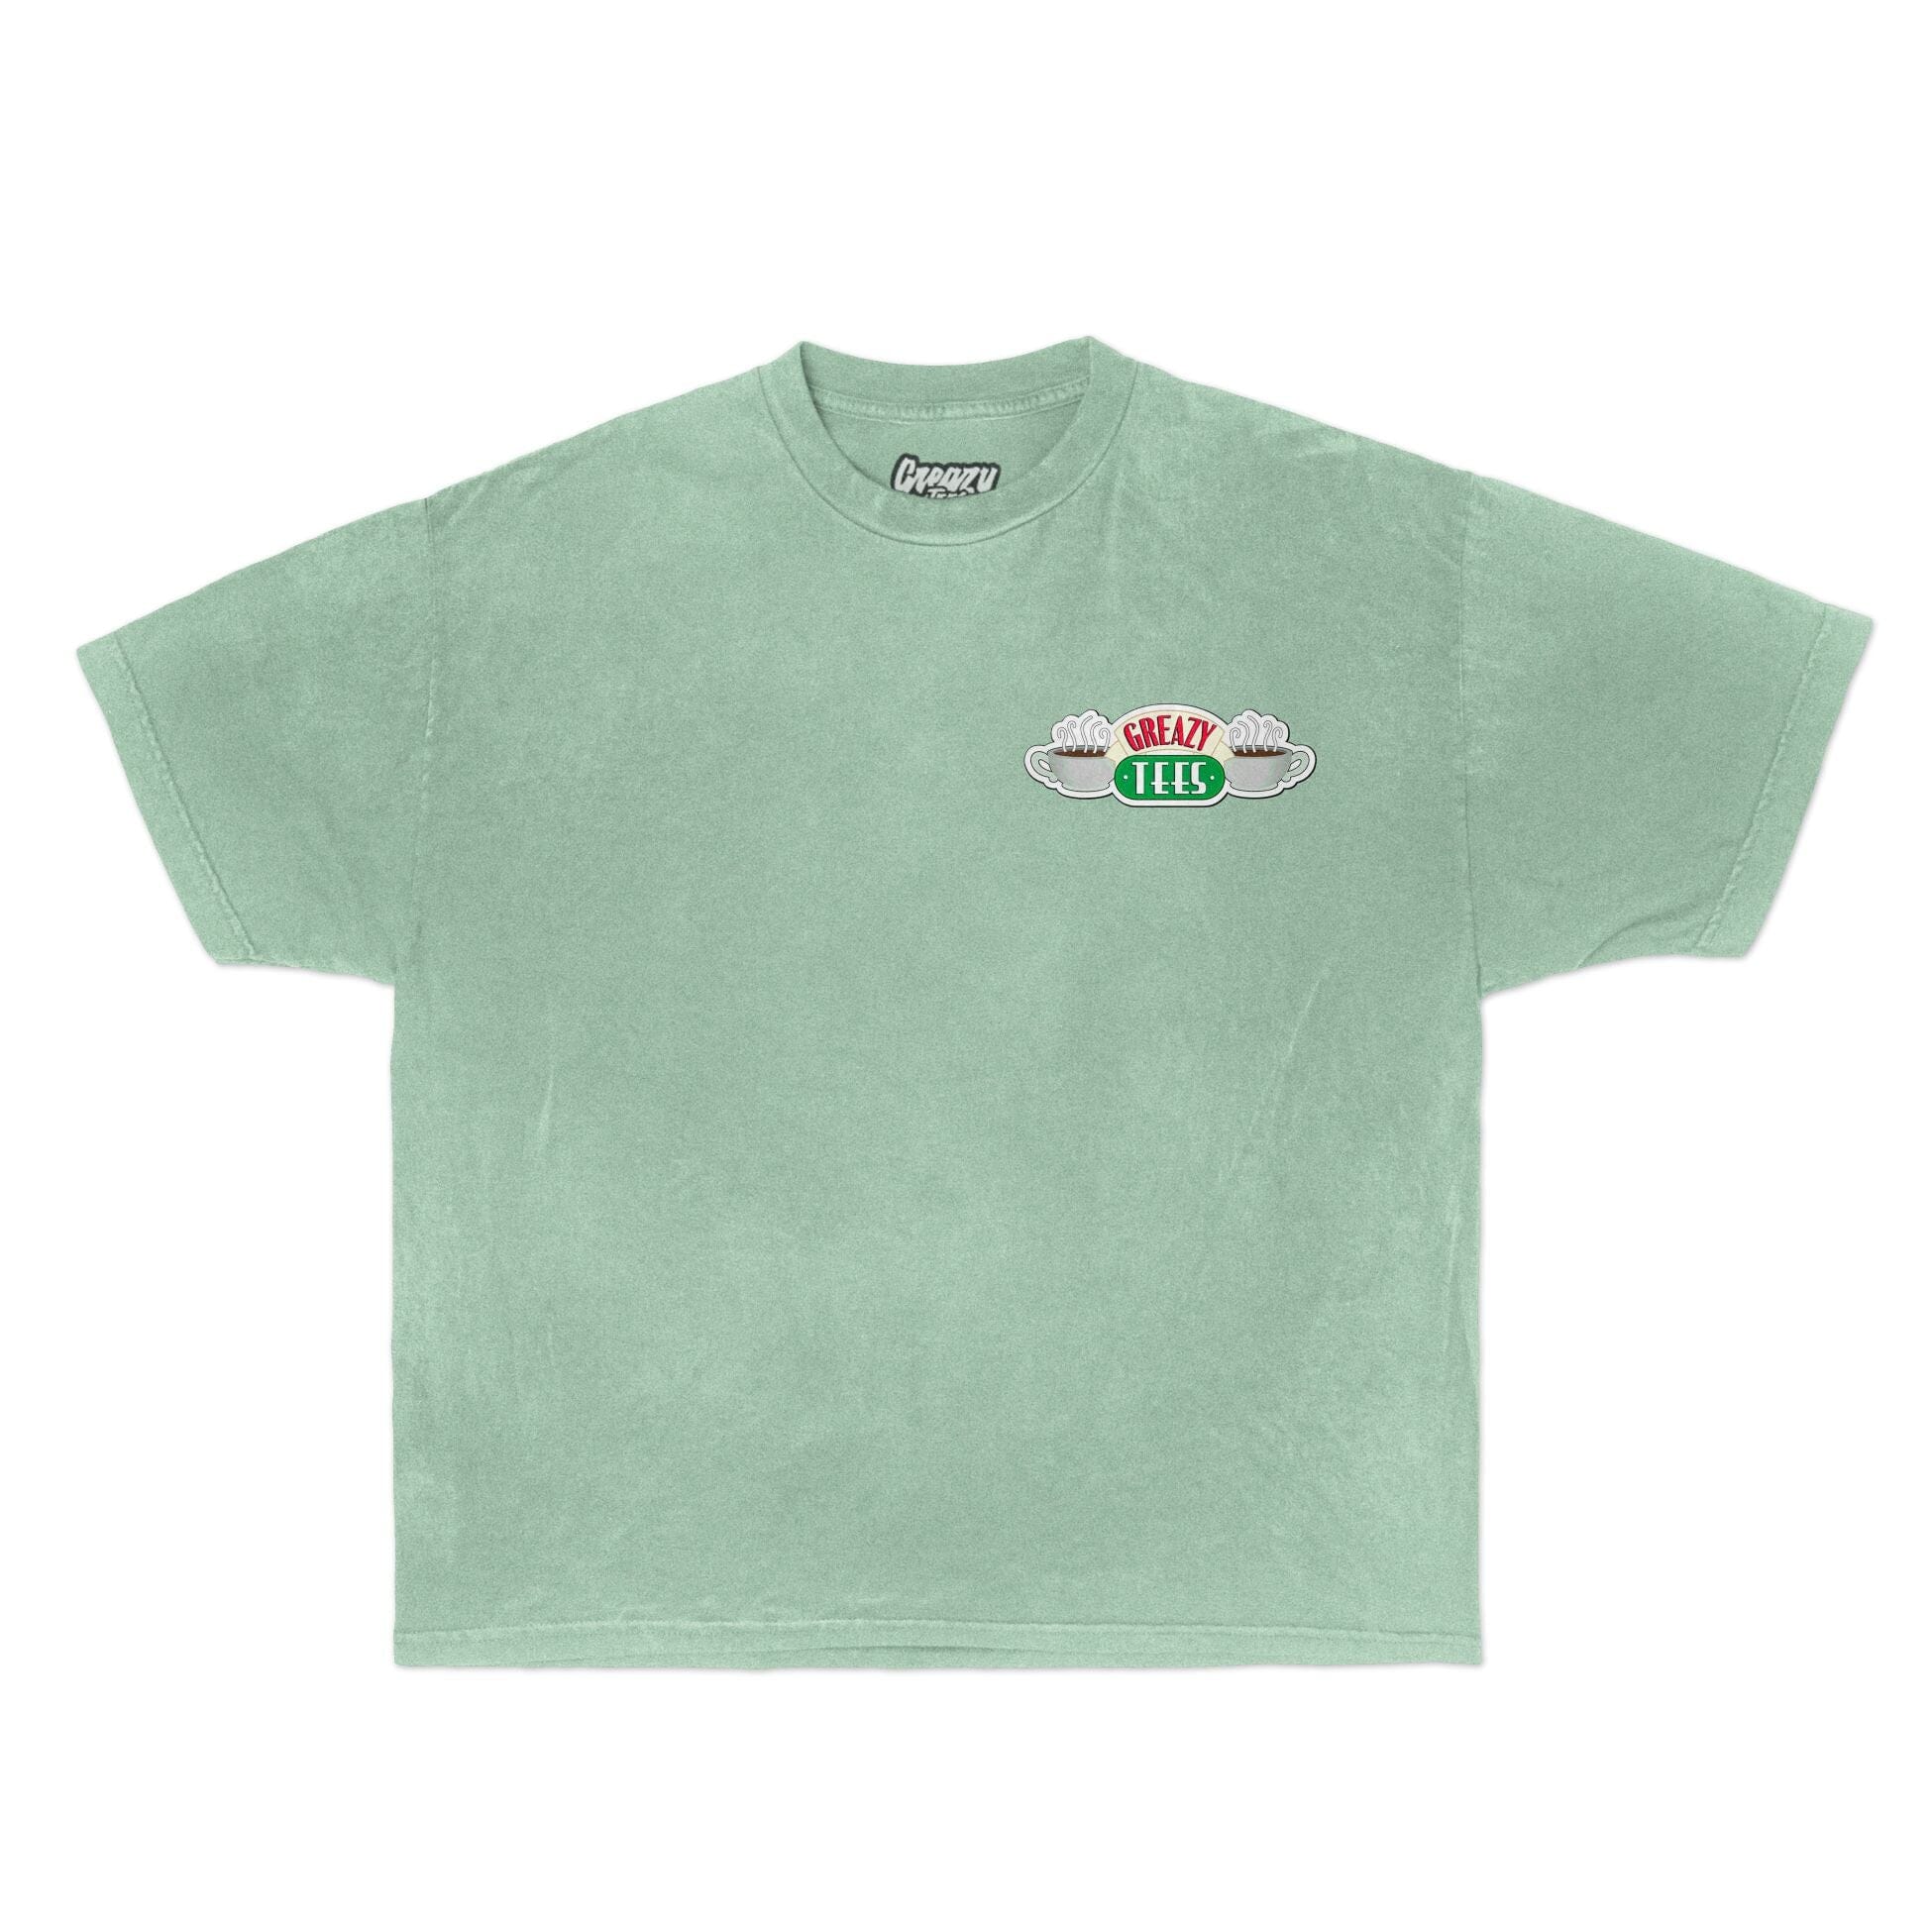 Central Perc Tee Tee Greazy Tees XS Mint Green Oversized